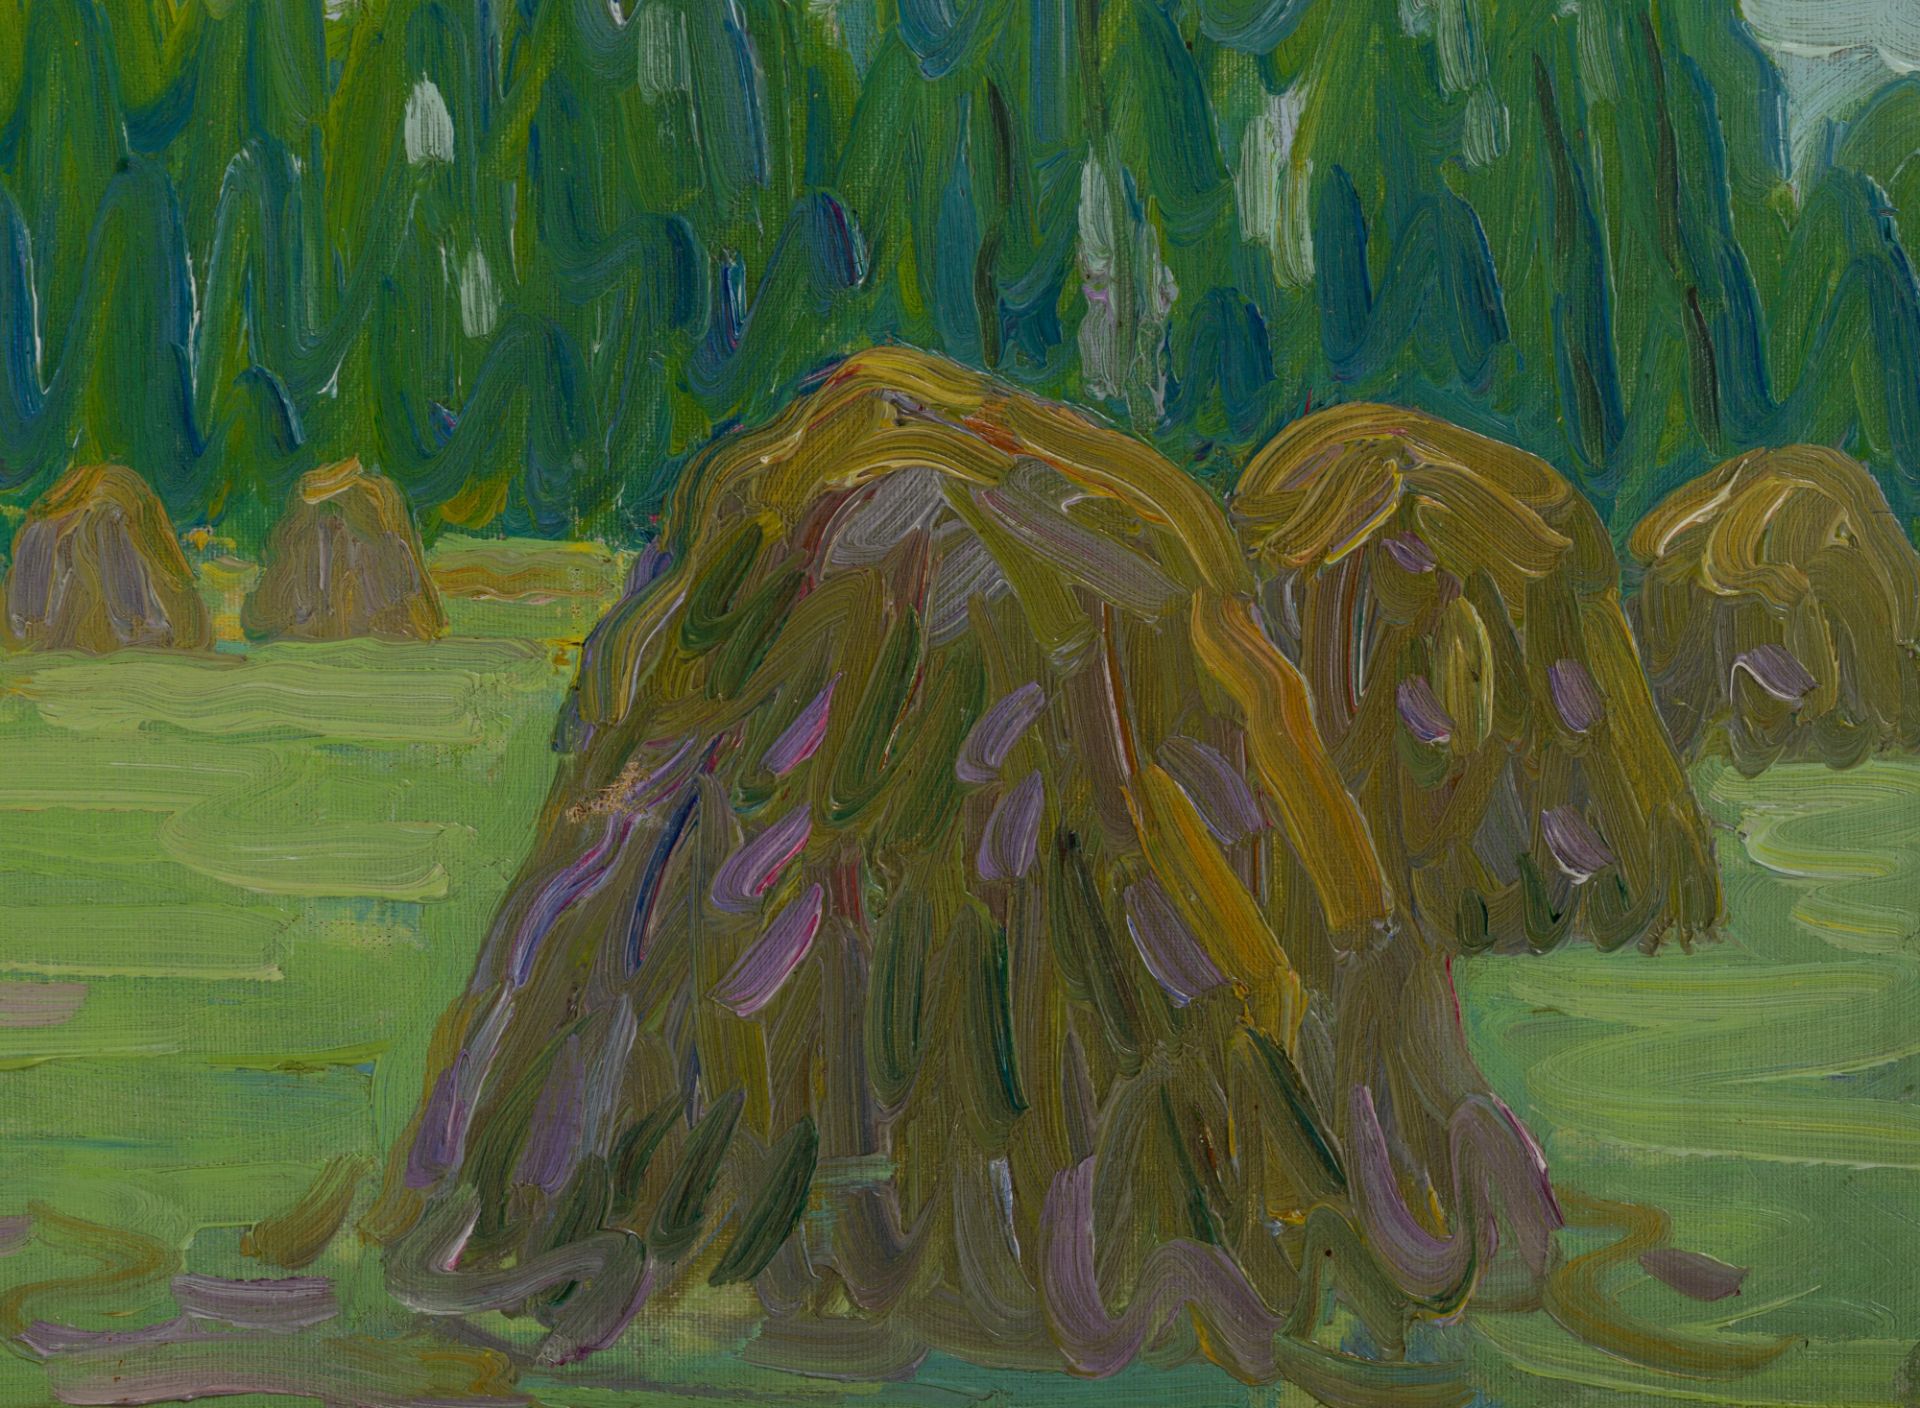 Horenbant J., the laundry tub, oil on canvas, 34 x 45 cm. Added: Montobio G., the haystacks in summe - Image 9 of 12